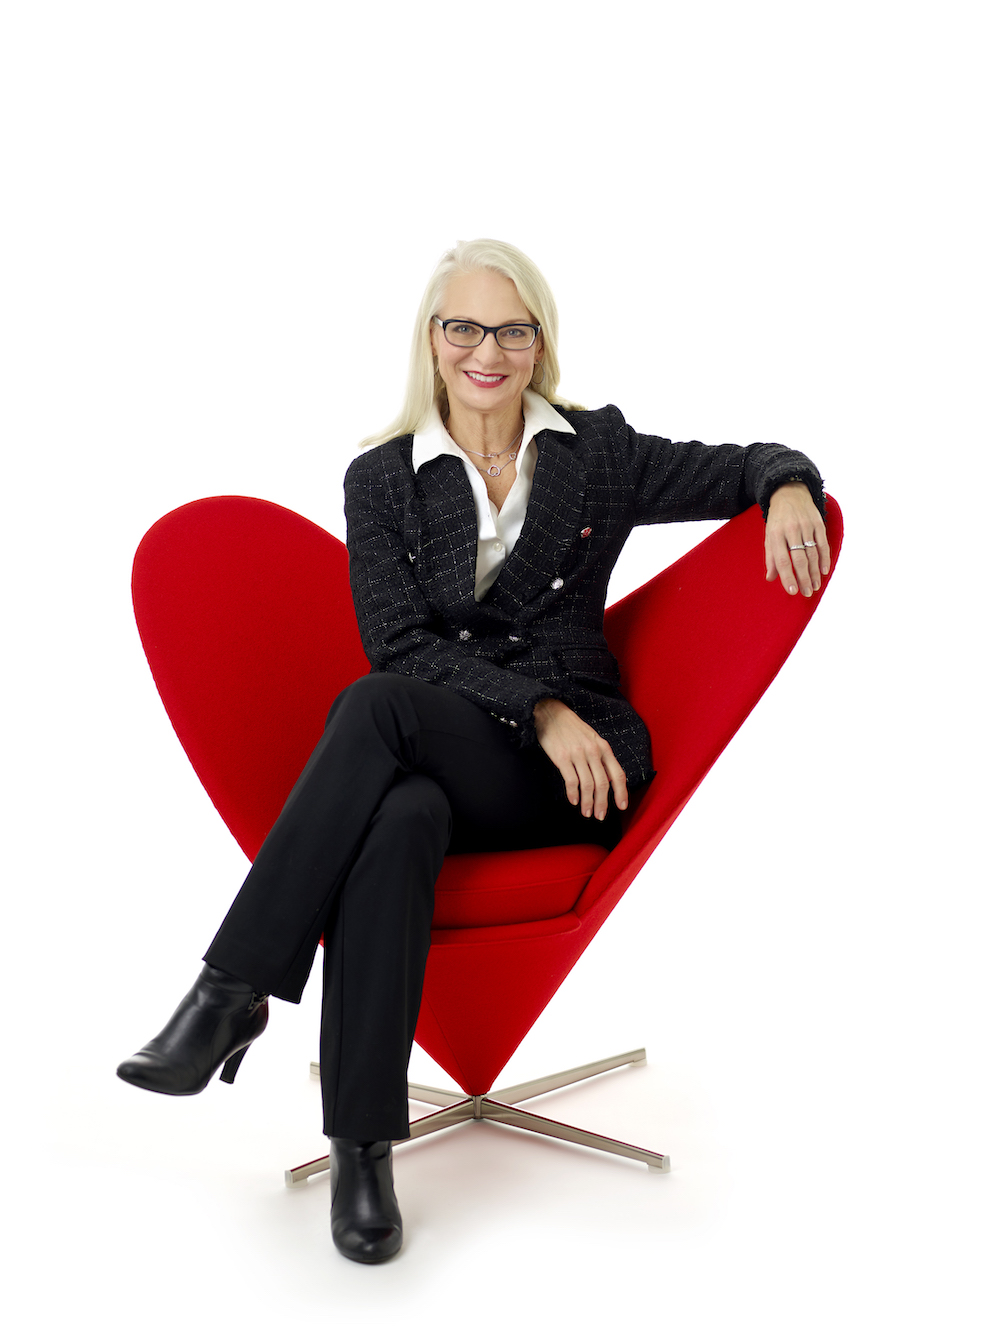 Sharon John sitting in a red chair